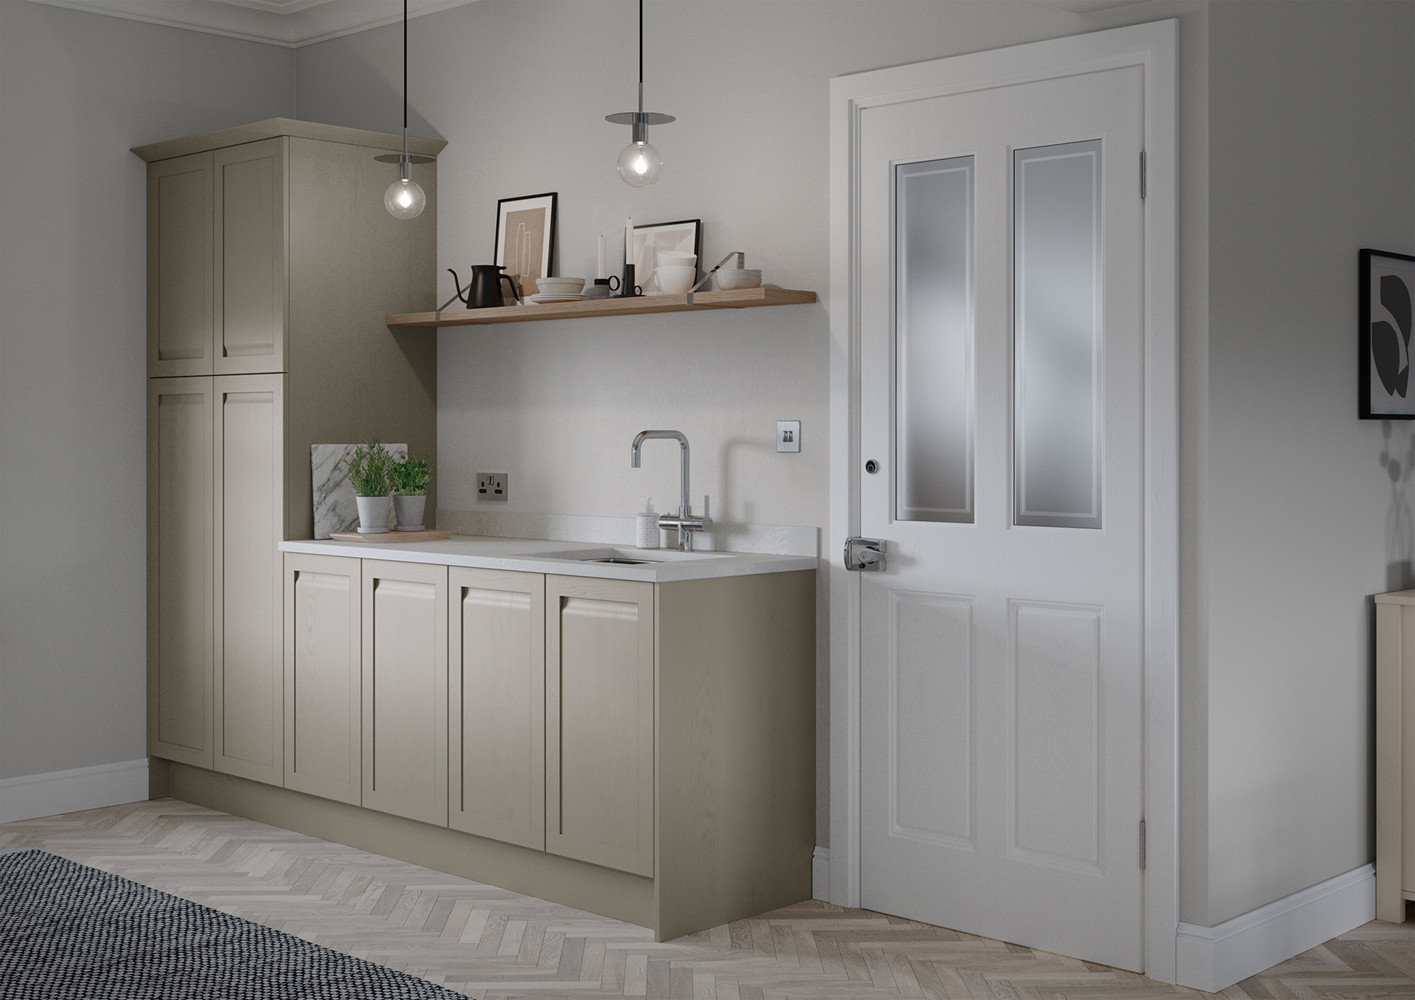 Hartford handleless kitchen door, showcased in a beautiful kitchen design using shell and stone paint to order colour options. Designed by The Kitchen Depot.